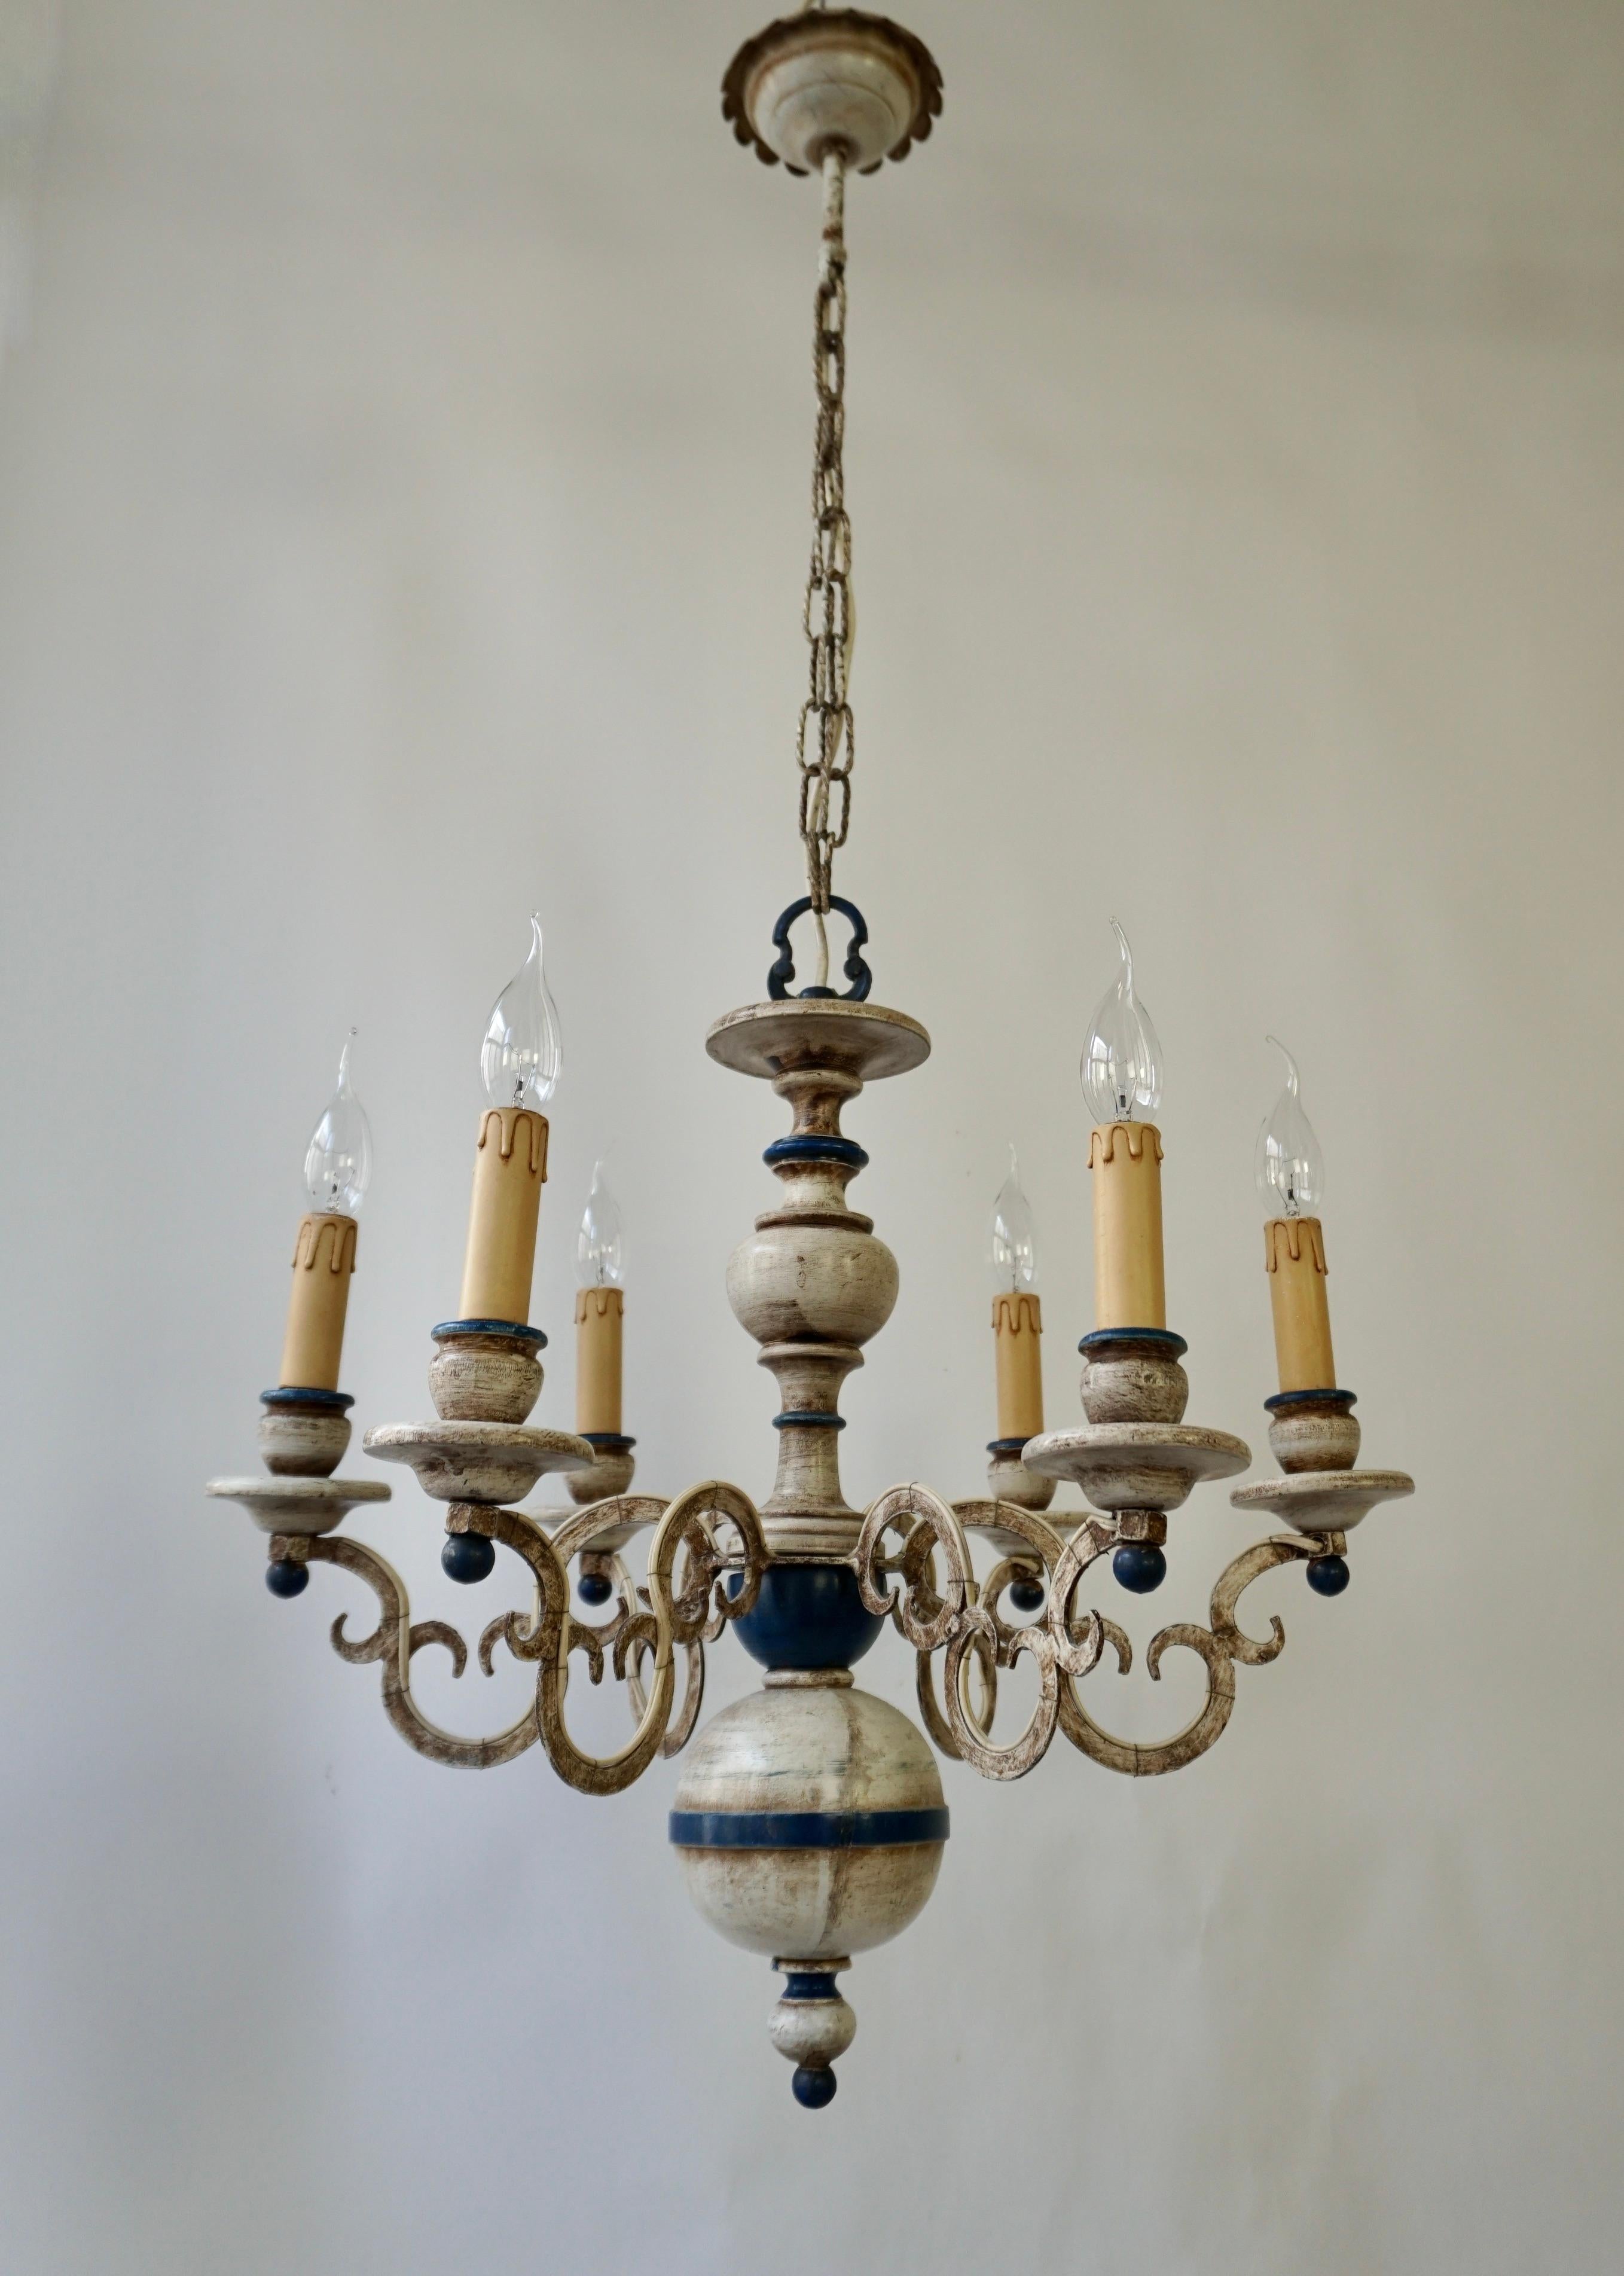 A French six-light painted wood and metal chandelier. 
This mid-20th century French chandelier features a carved wood column with fluid s-shaped swooping arms lifting up and out from its centre. This column features a serious of bulbous shapes.The